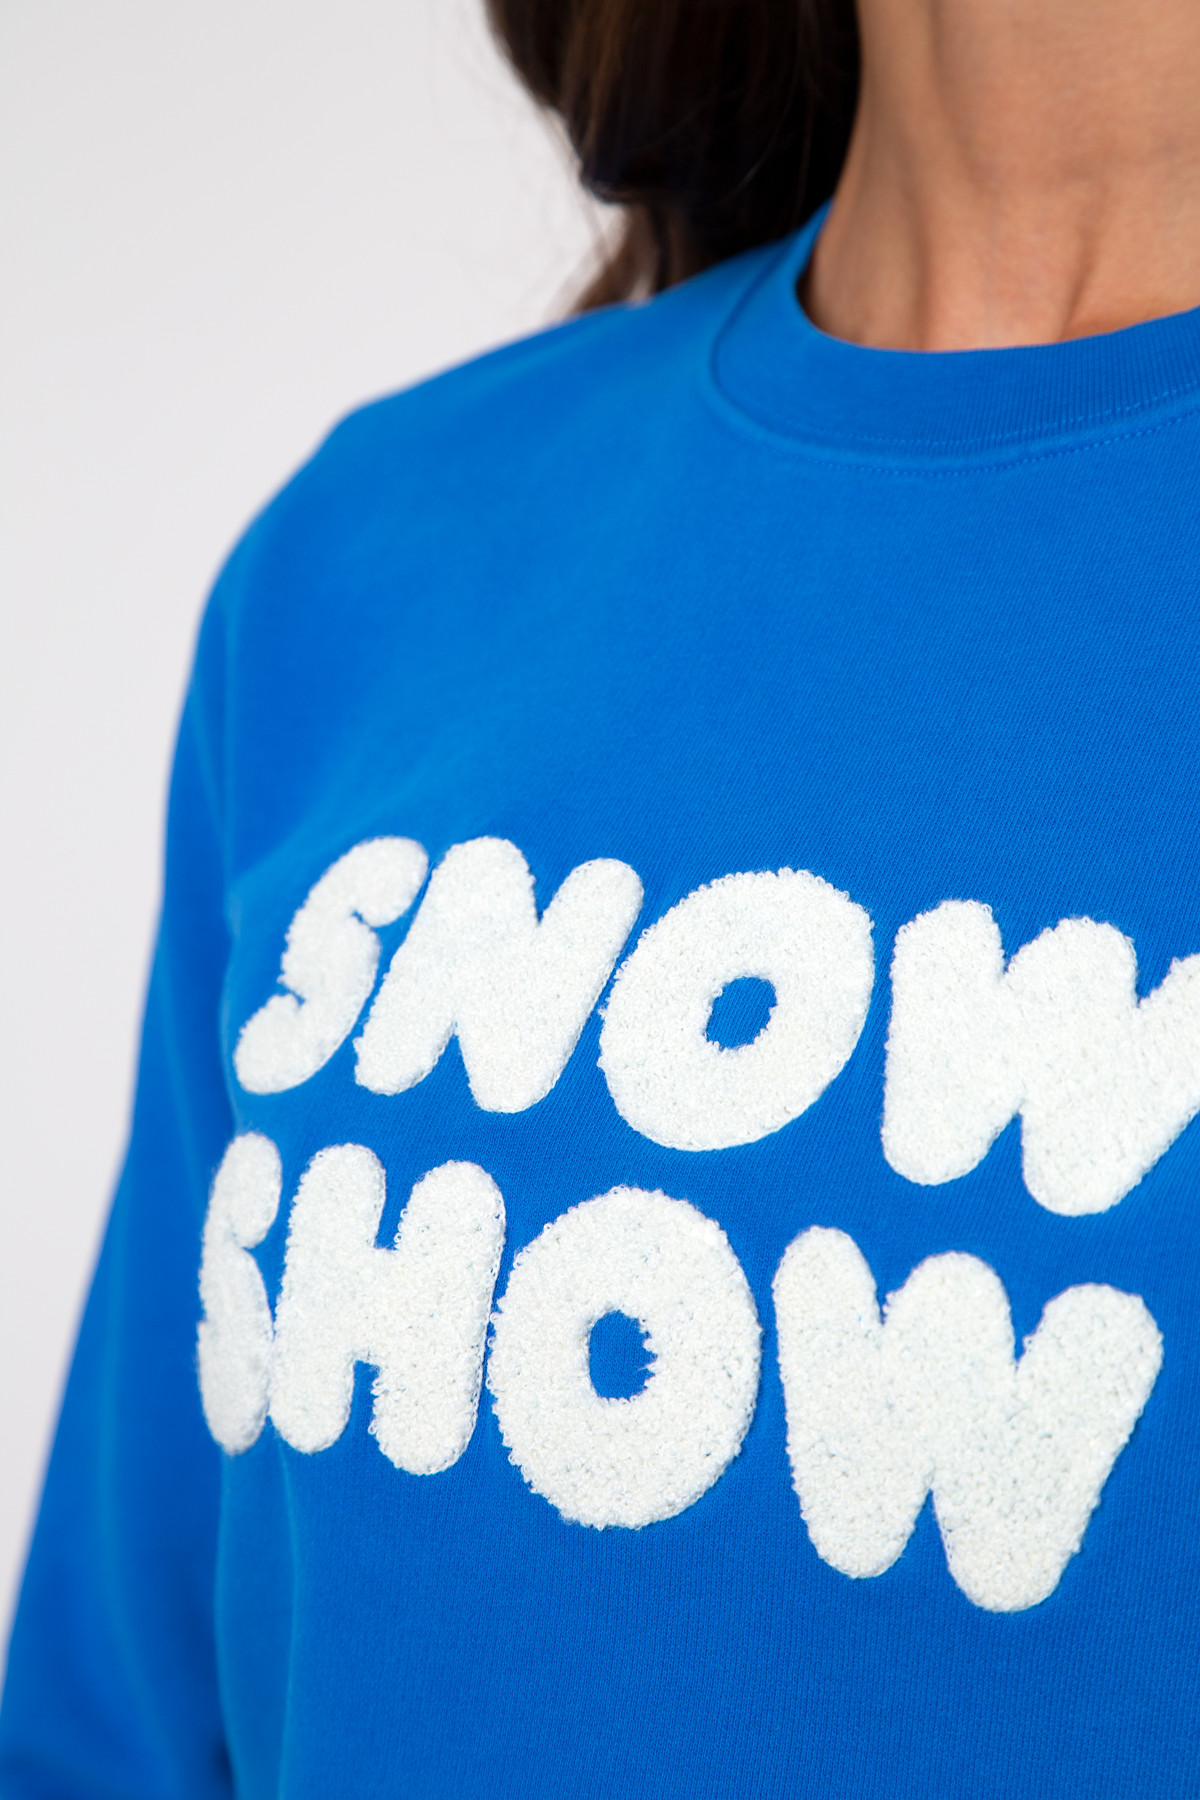 Photo de Anciennes collections femme Sweat SNOW SHOW chez French Disorder